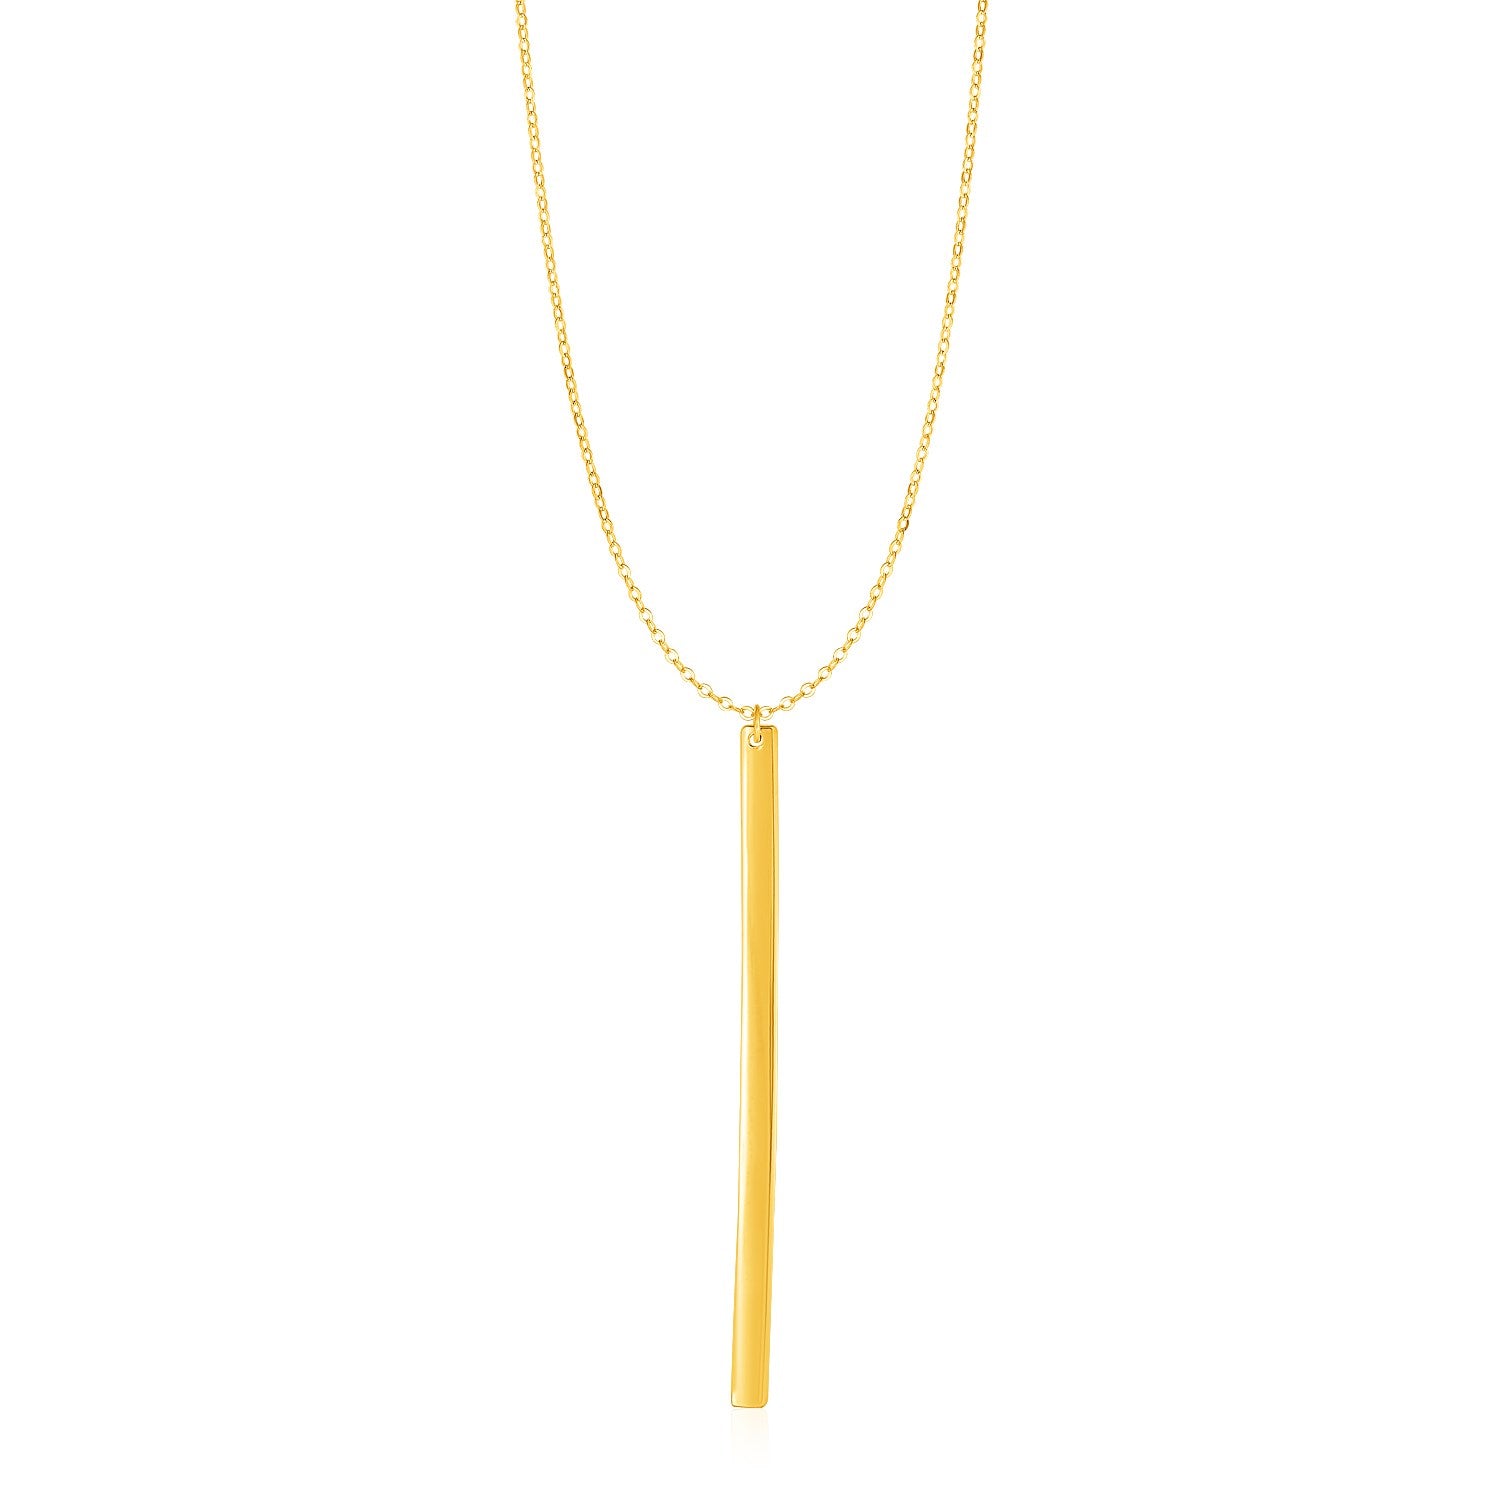 Necklace with Long Bar Pendant in 14k Yellow Gold